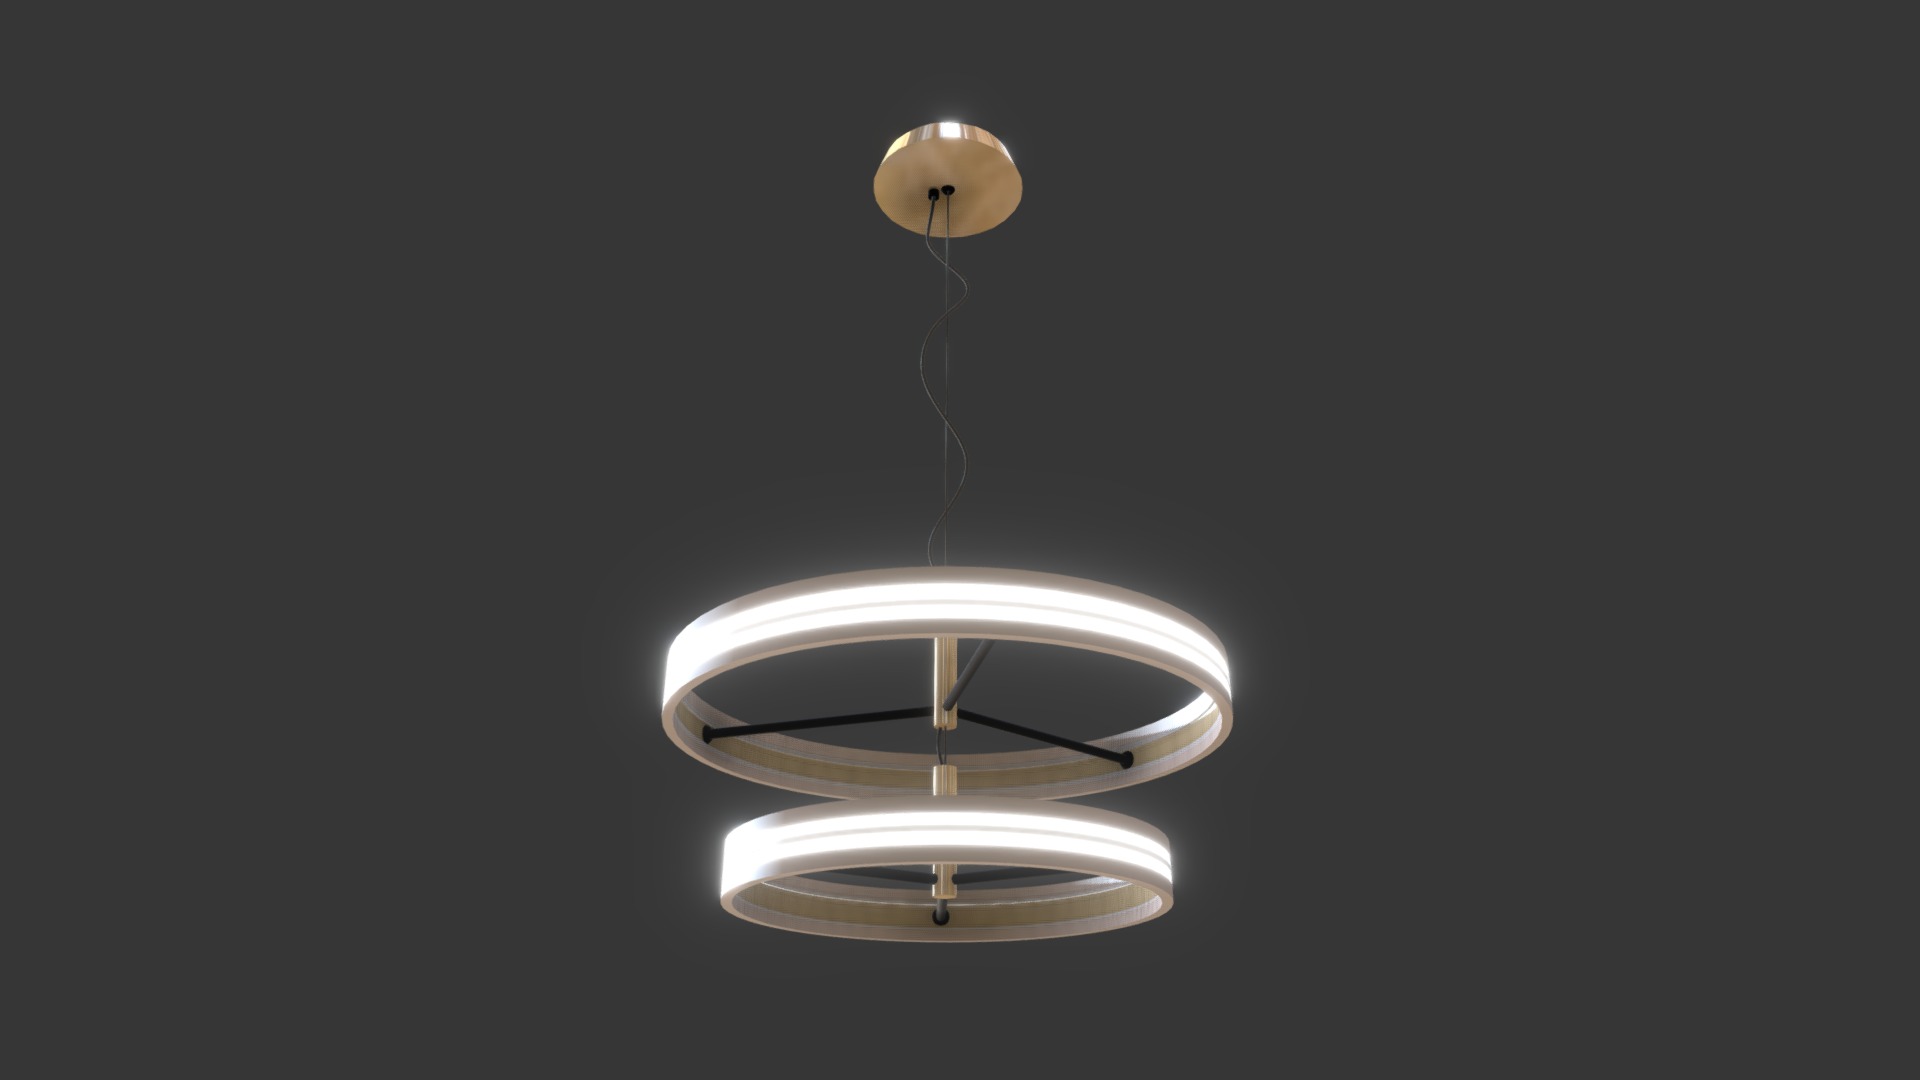 3D model HGP0298 - This is a 3D model of the HGP0298. The 3D model is about a light fixture with a light bulb.